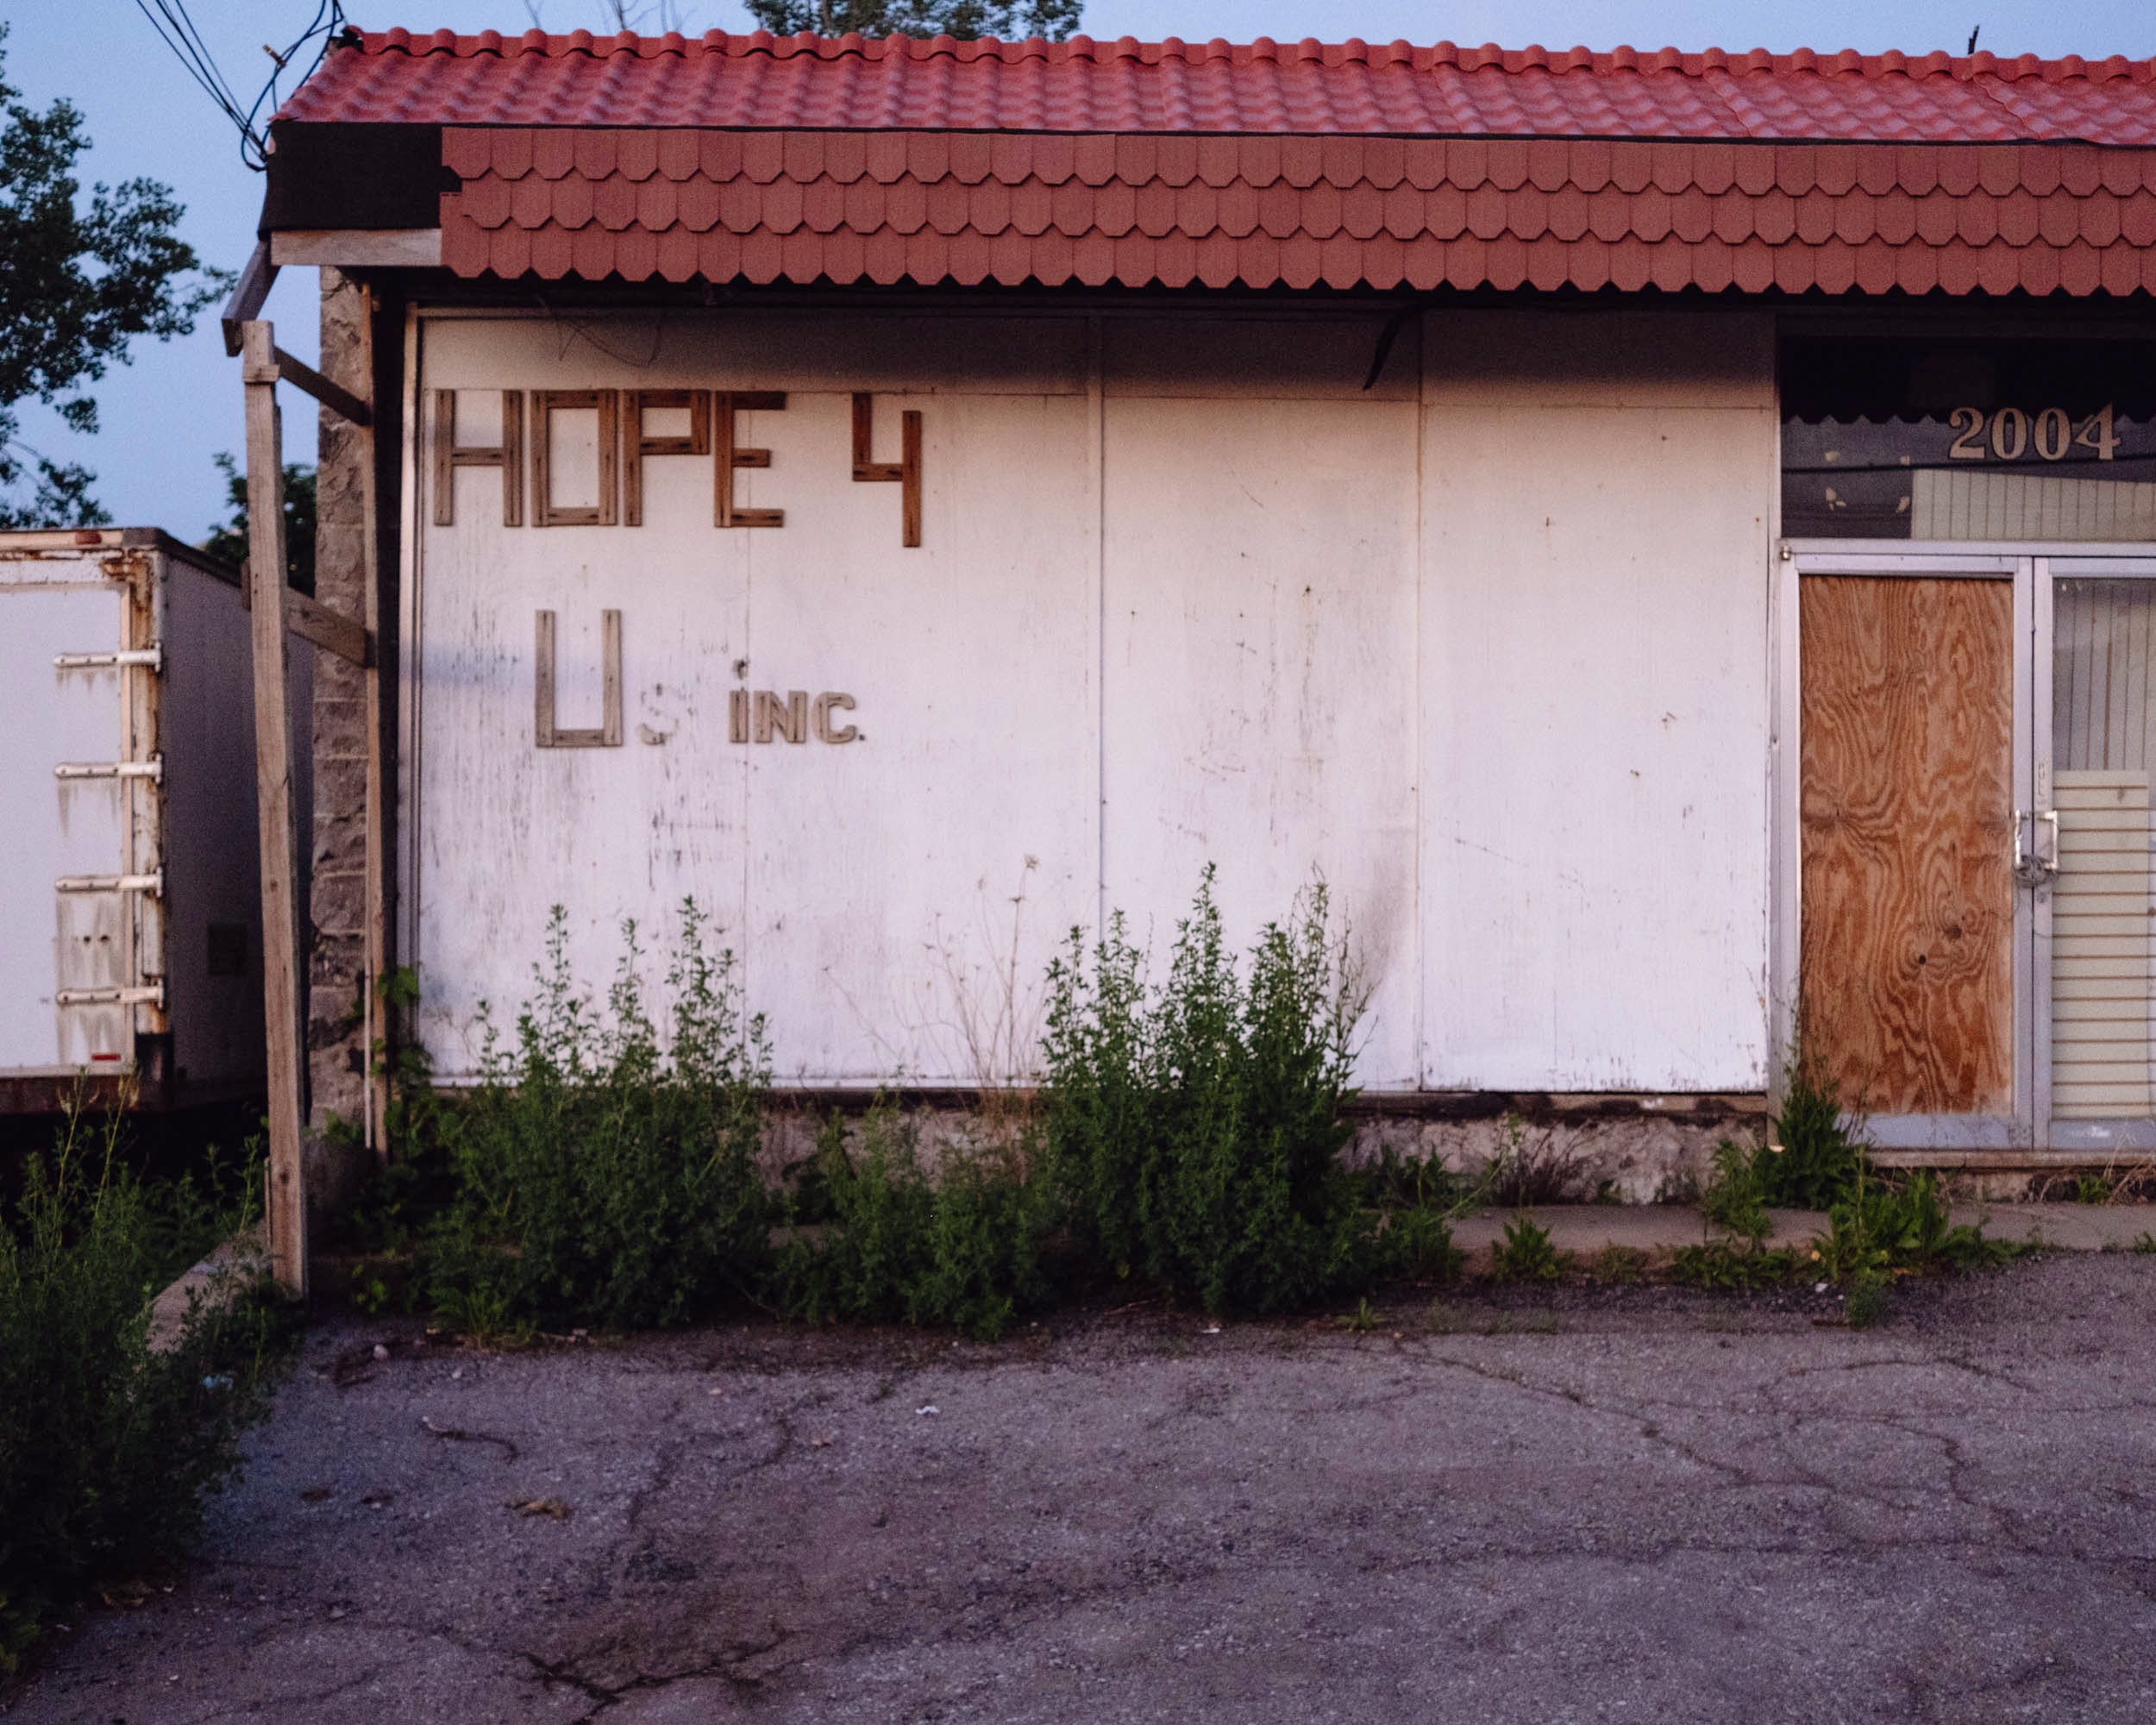 An abandoned building with the words "Hope 4 U inc" on the facade. The doors are boarded up with plywood.